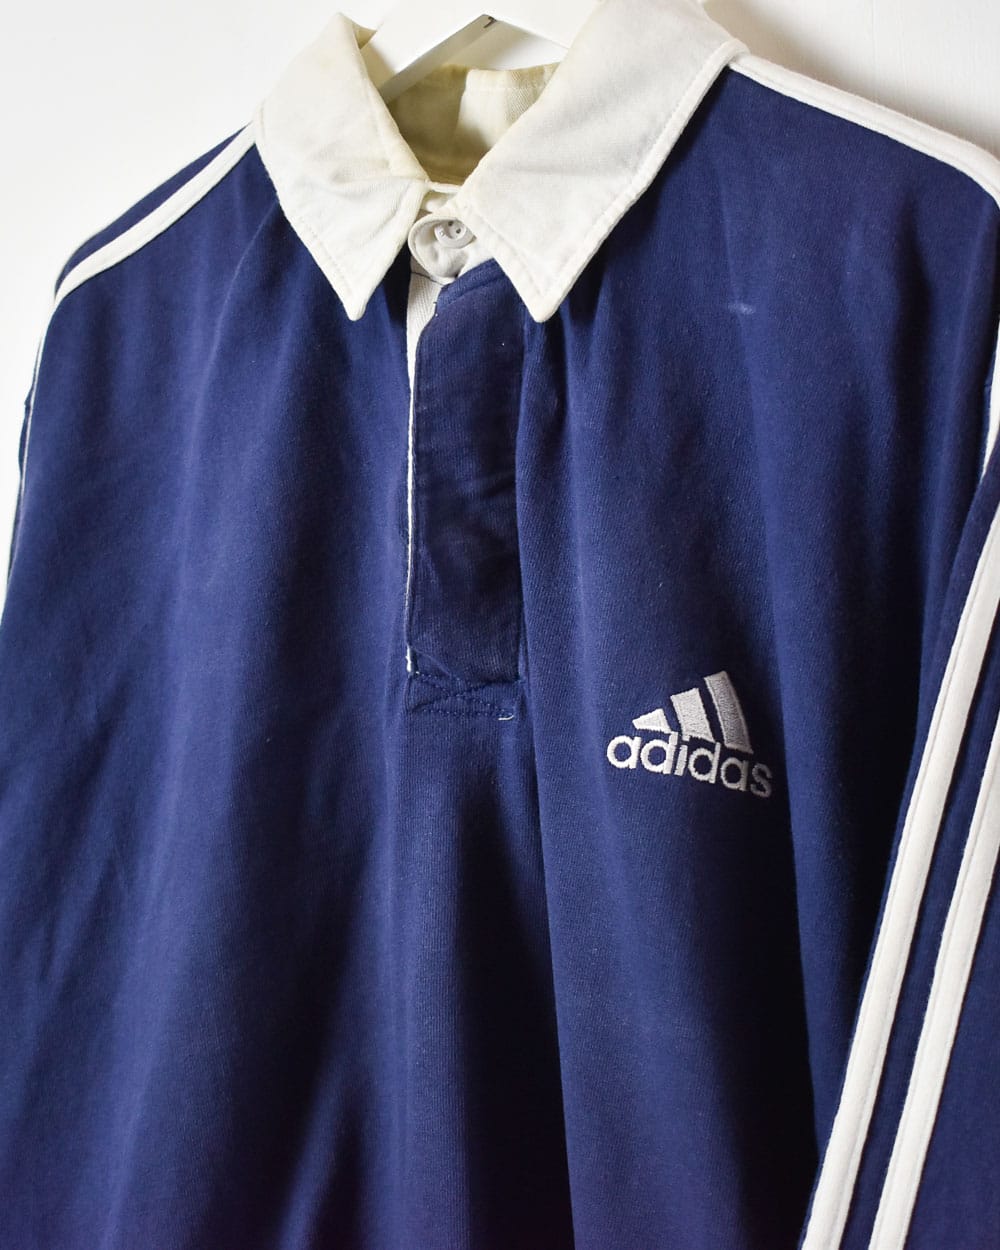 Navy Adidas Rugby Shirt - X-Large